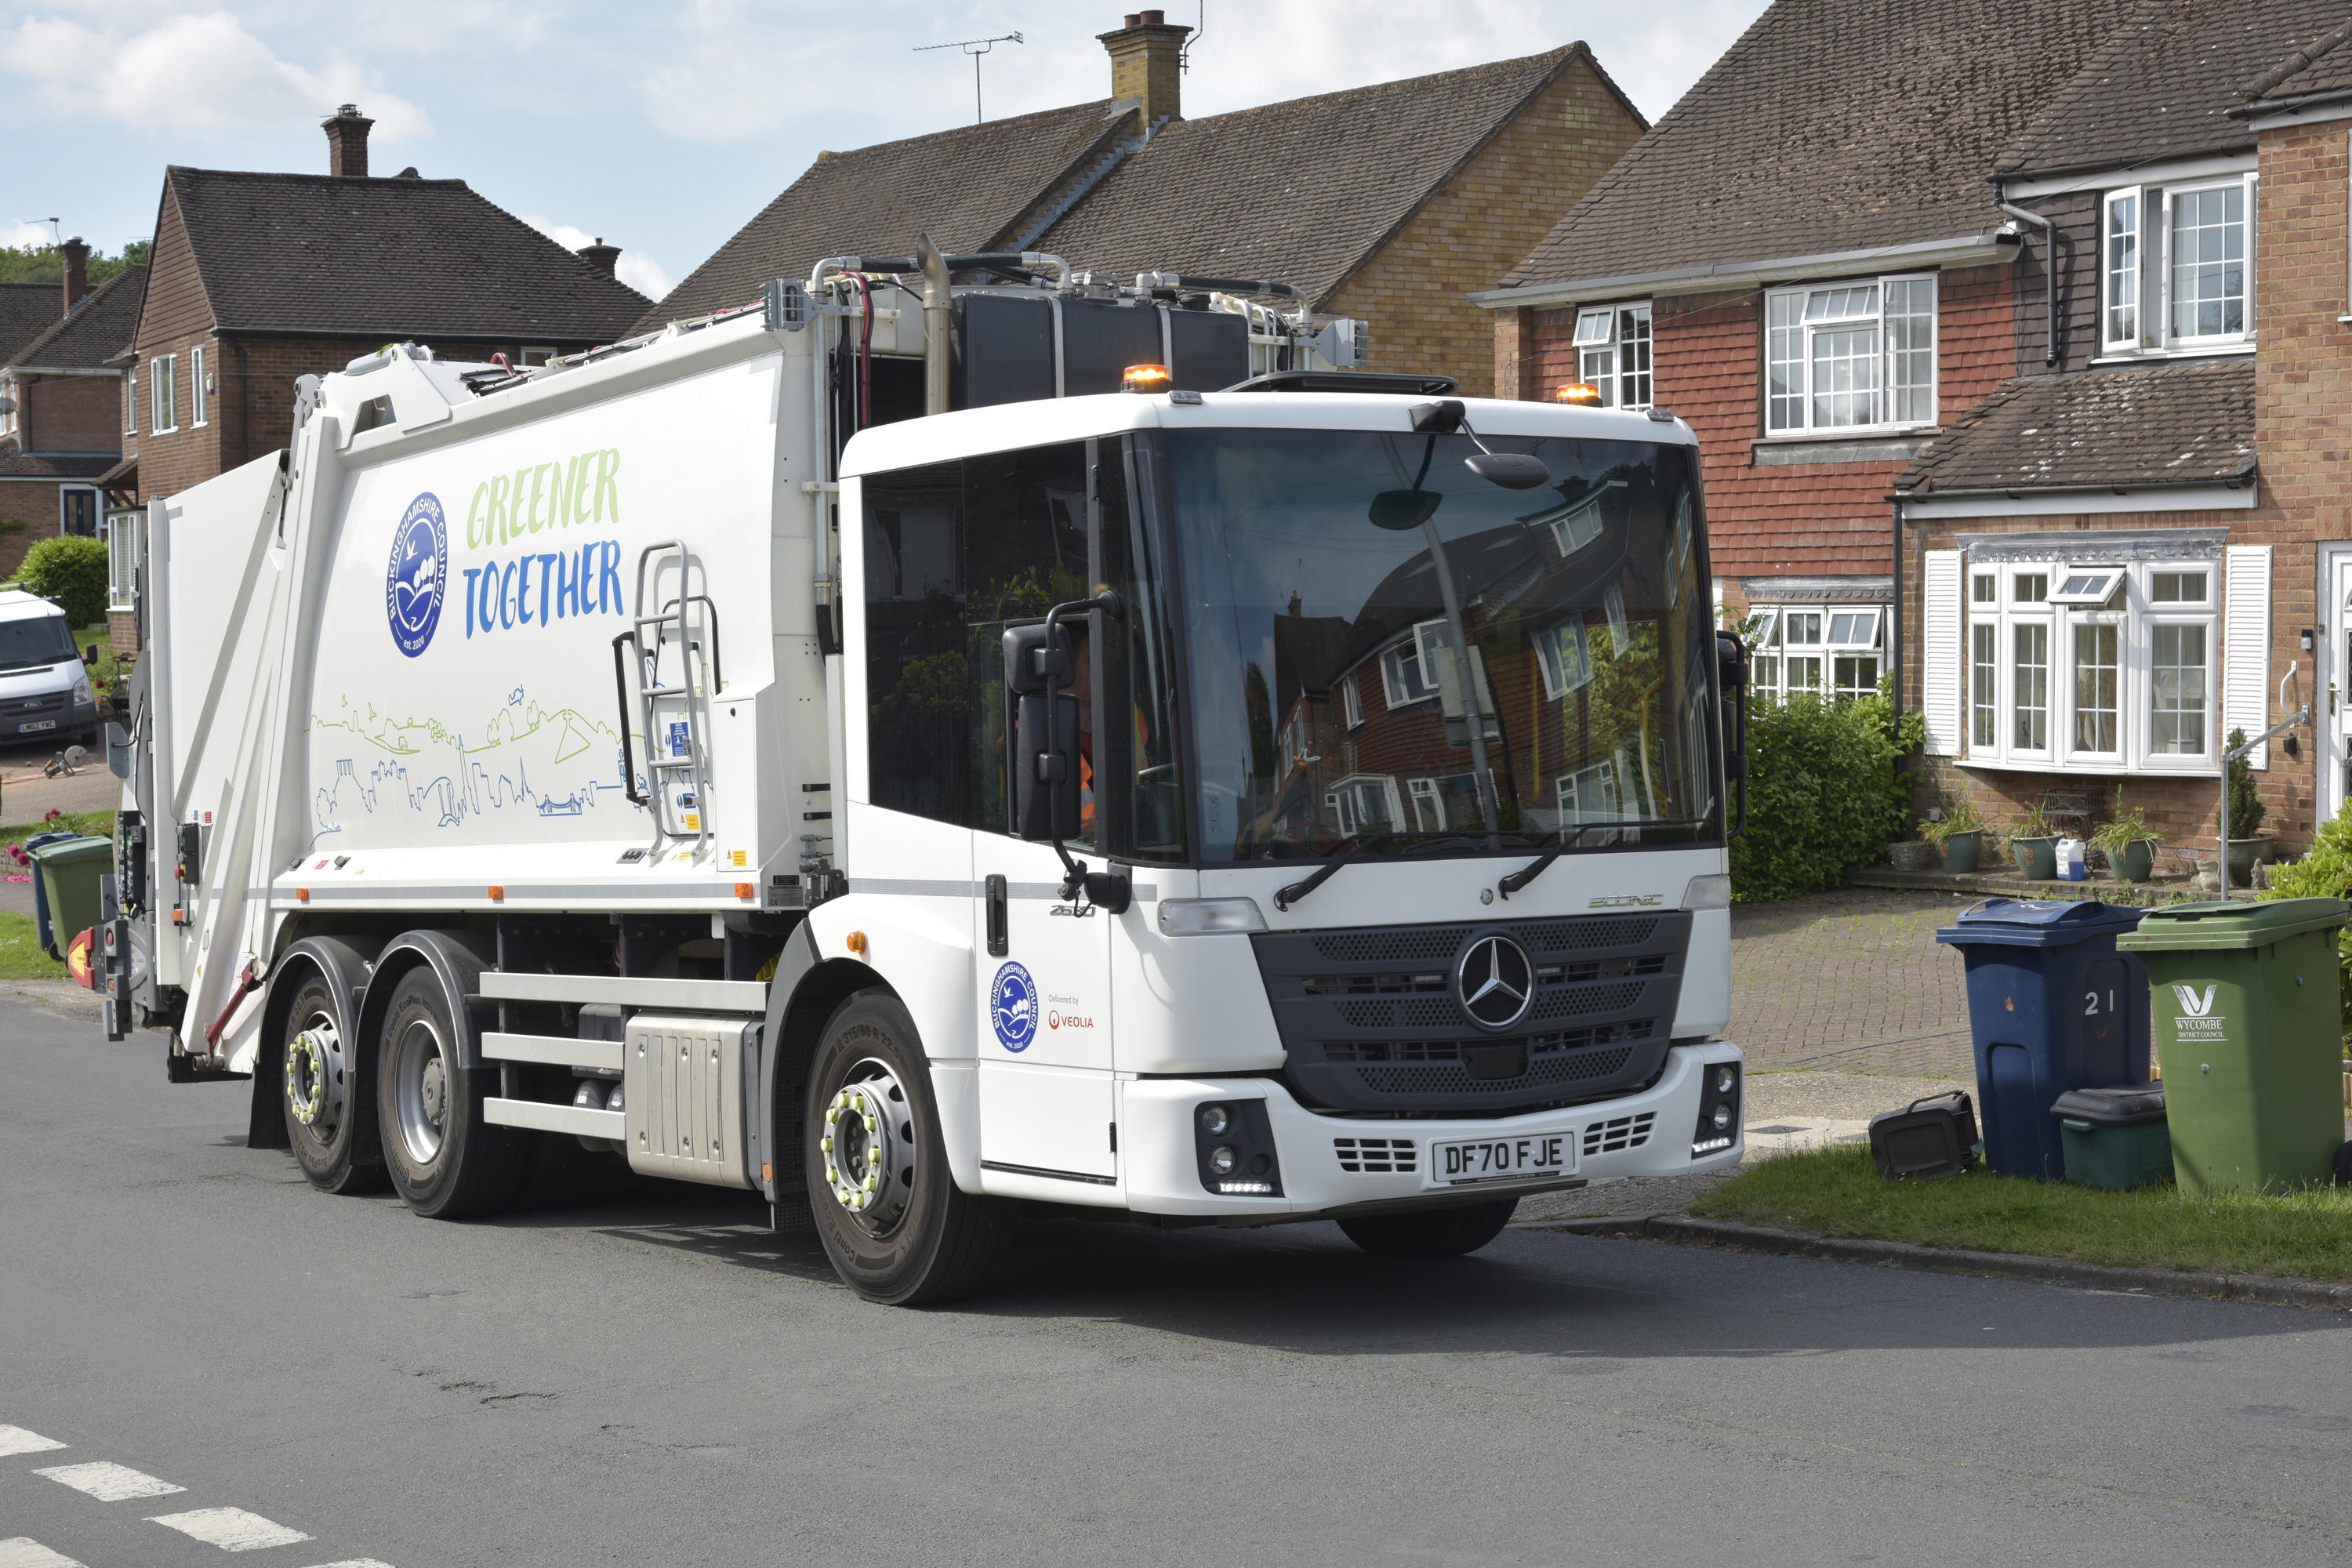 A Veolia Buckinghamshire Recycling Collection Vehicle is parked on a residential street.